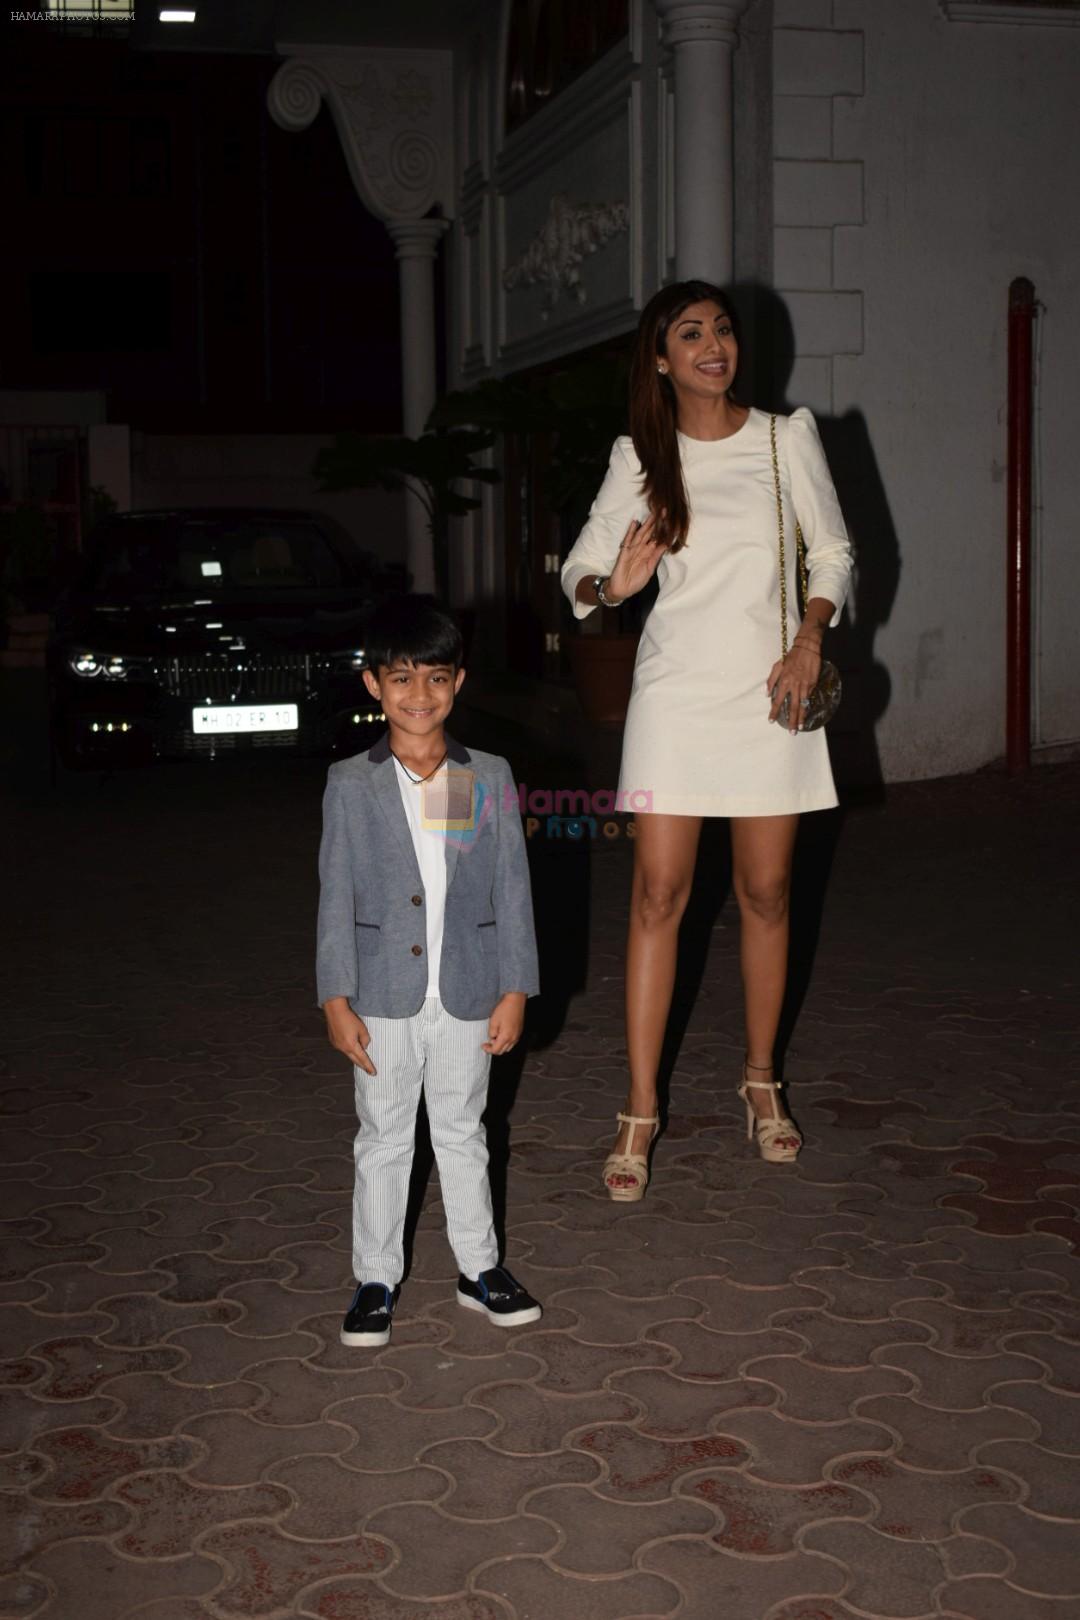 Shilpa Shetty, Raj Kundra & Viaan snapped as they go out for dinner on Viaan's birthday at juhu on 20th May 2018